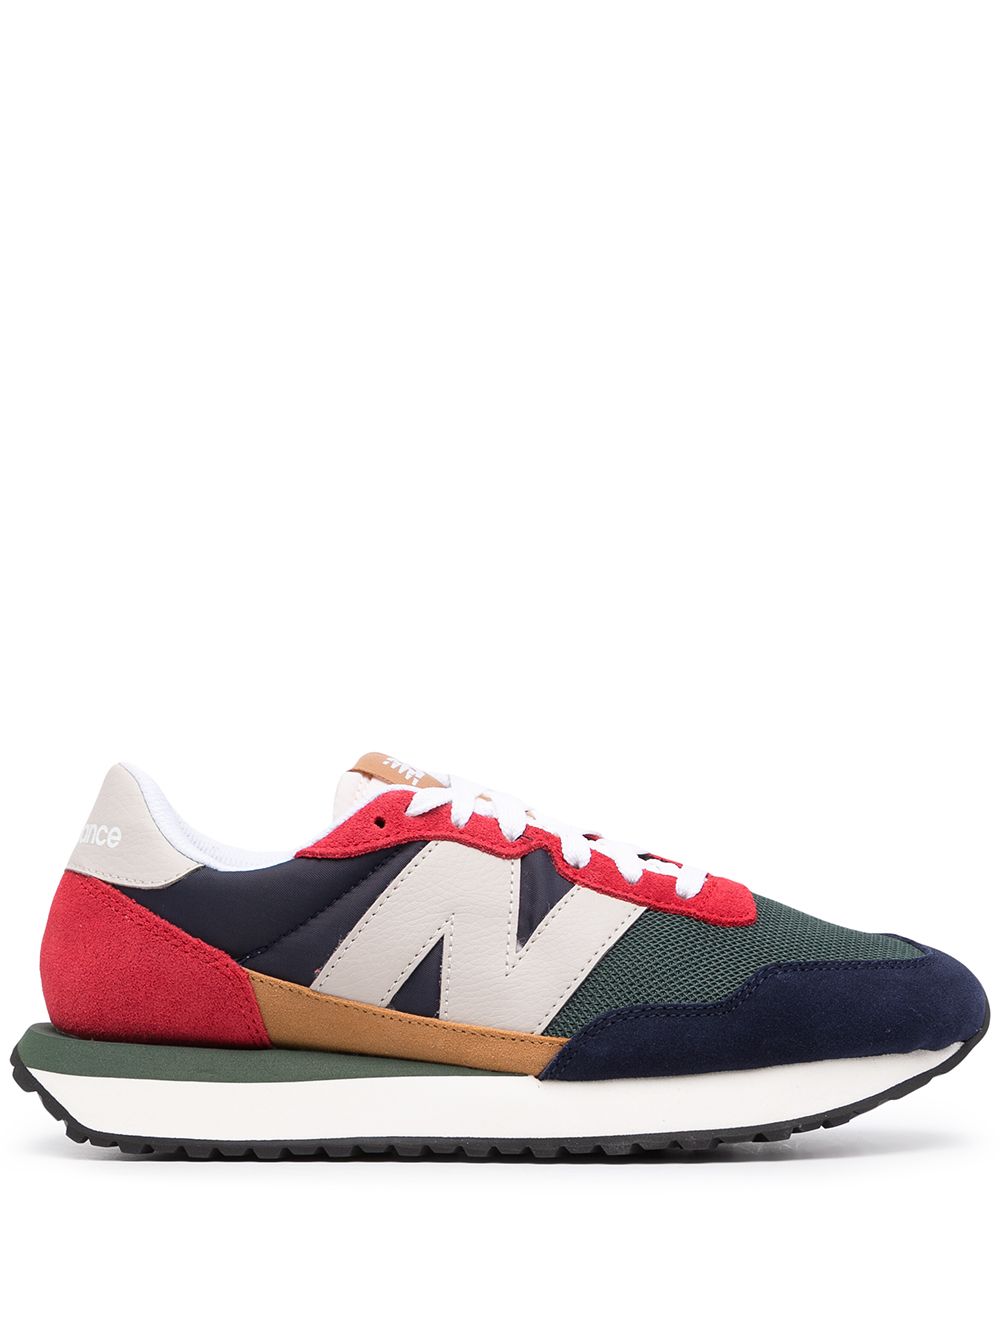 NEW BALANCE 237 LACE-UP SNEAKERS